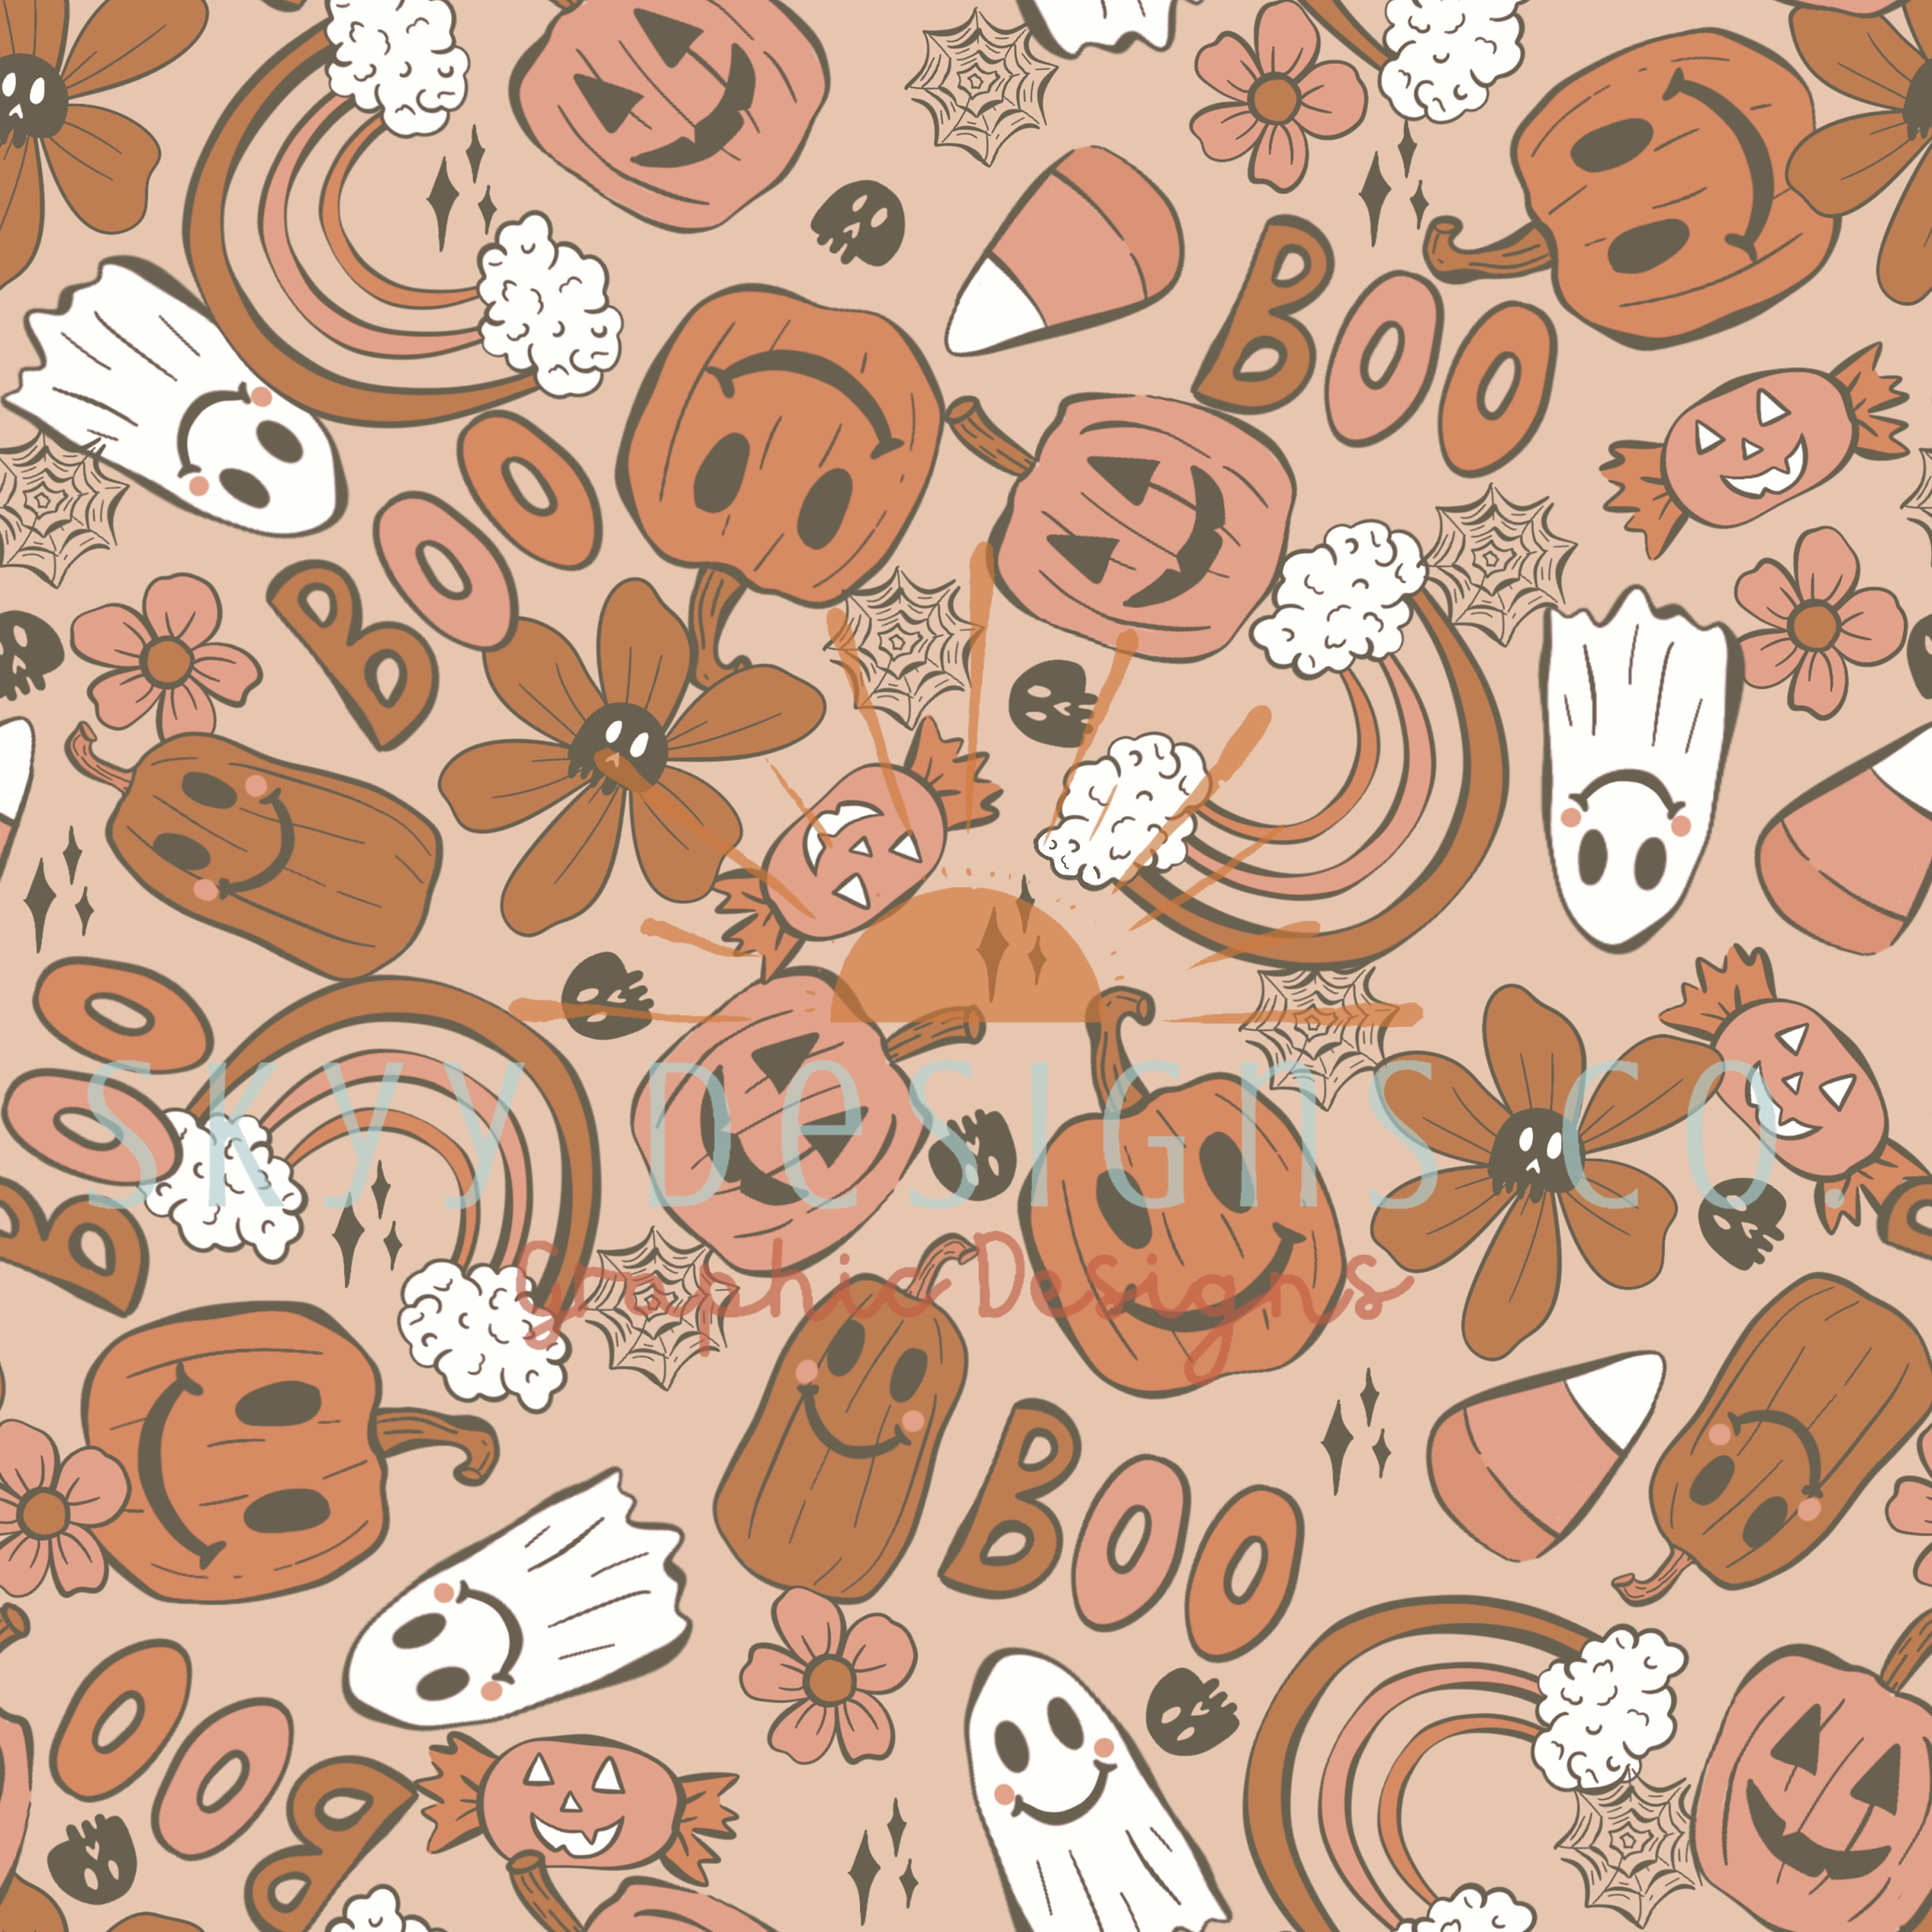 Boho Smiley Face Pumpkins And Ghosts For Halloween Digital